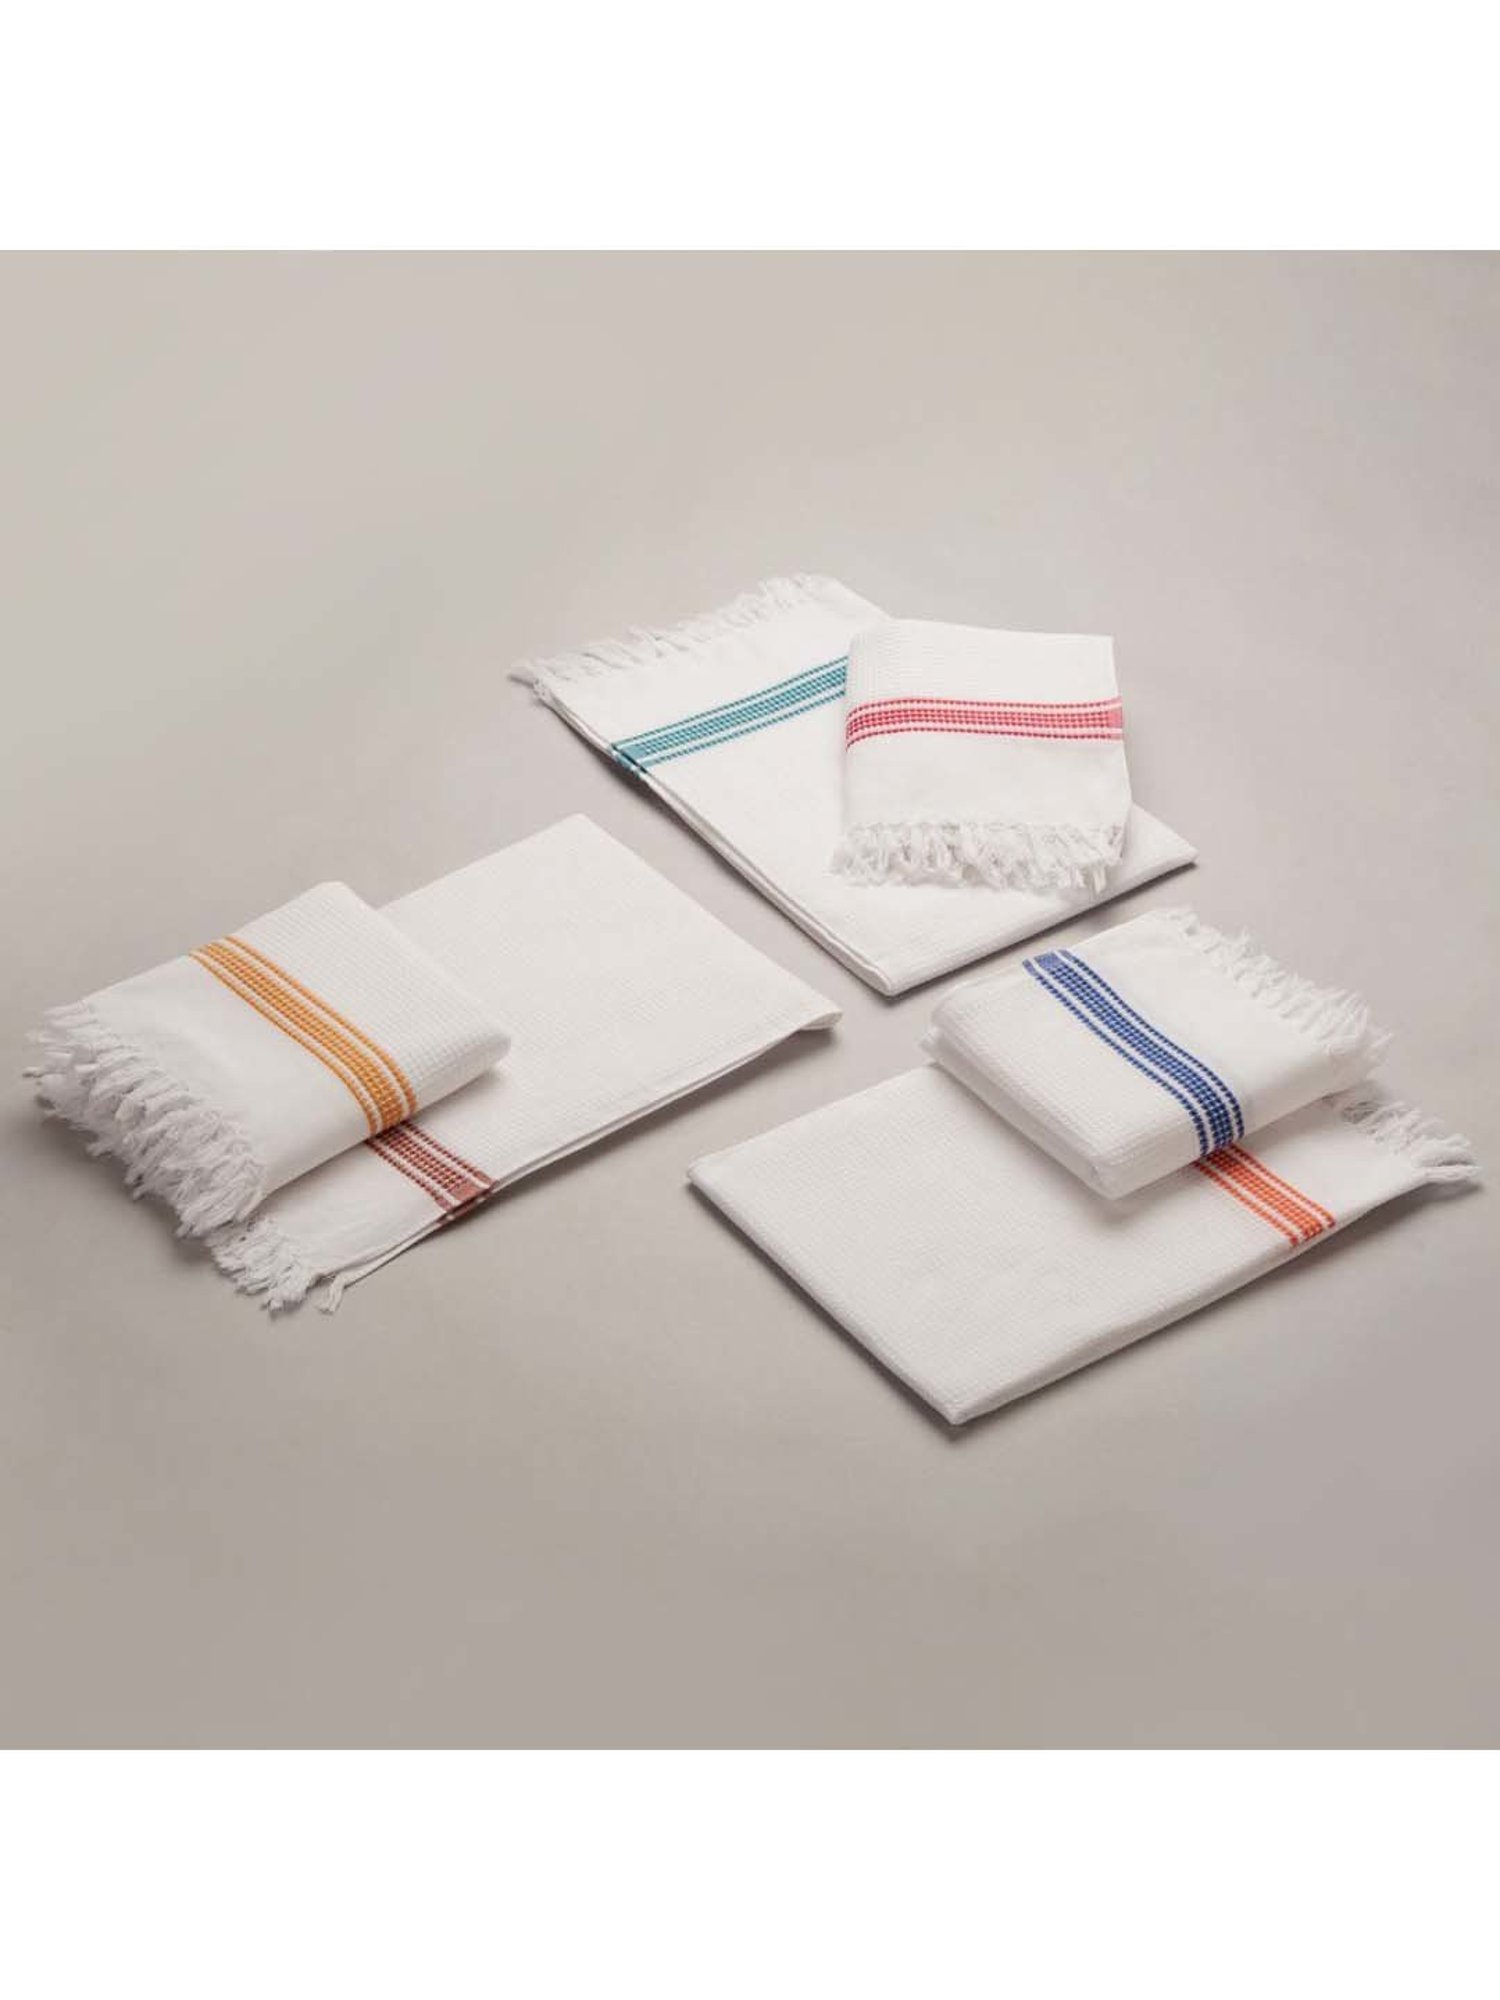 Welspun Towels in Ahmedabad - Dealers, Manufacturers & Suppliers - Justdial